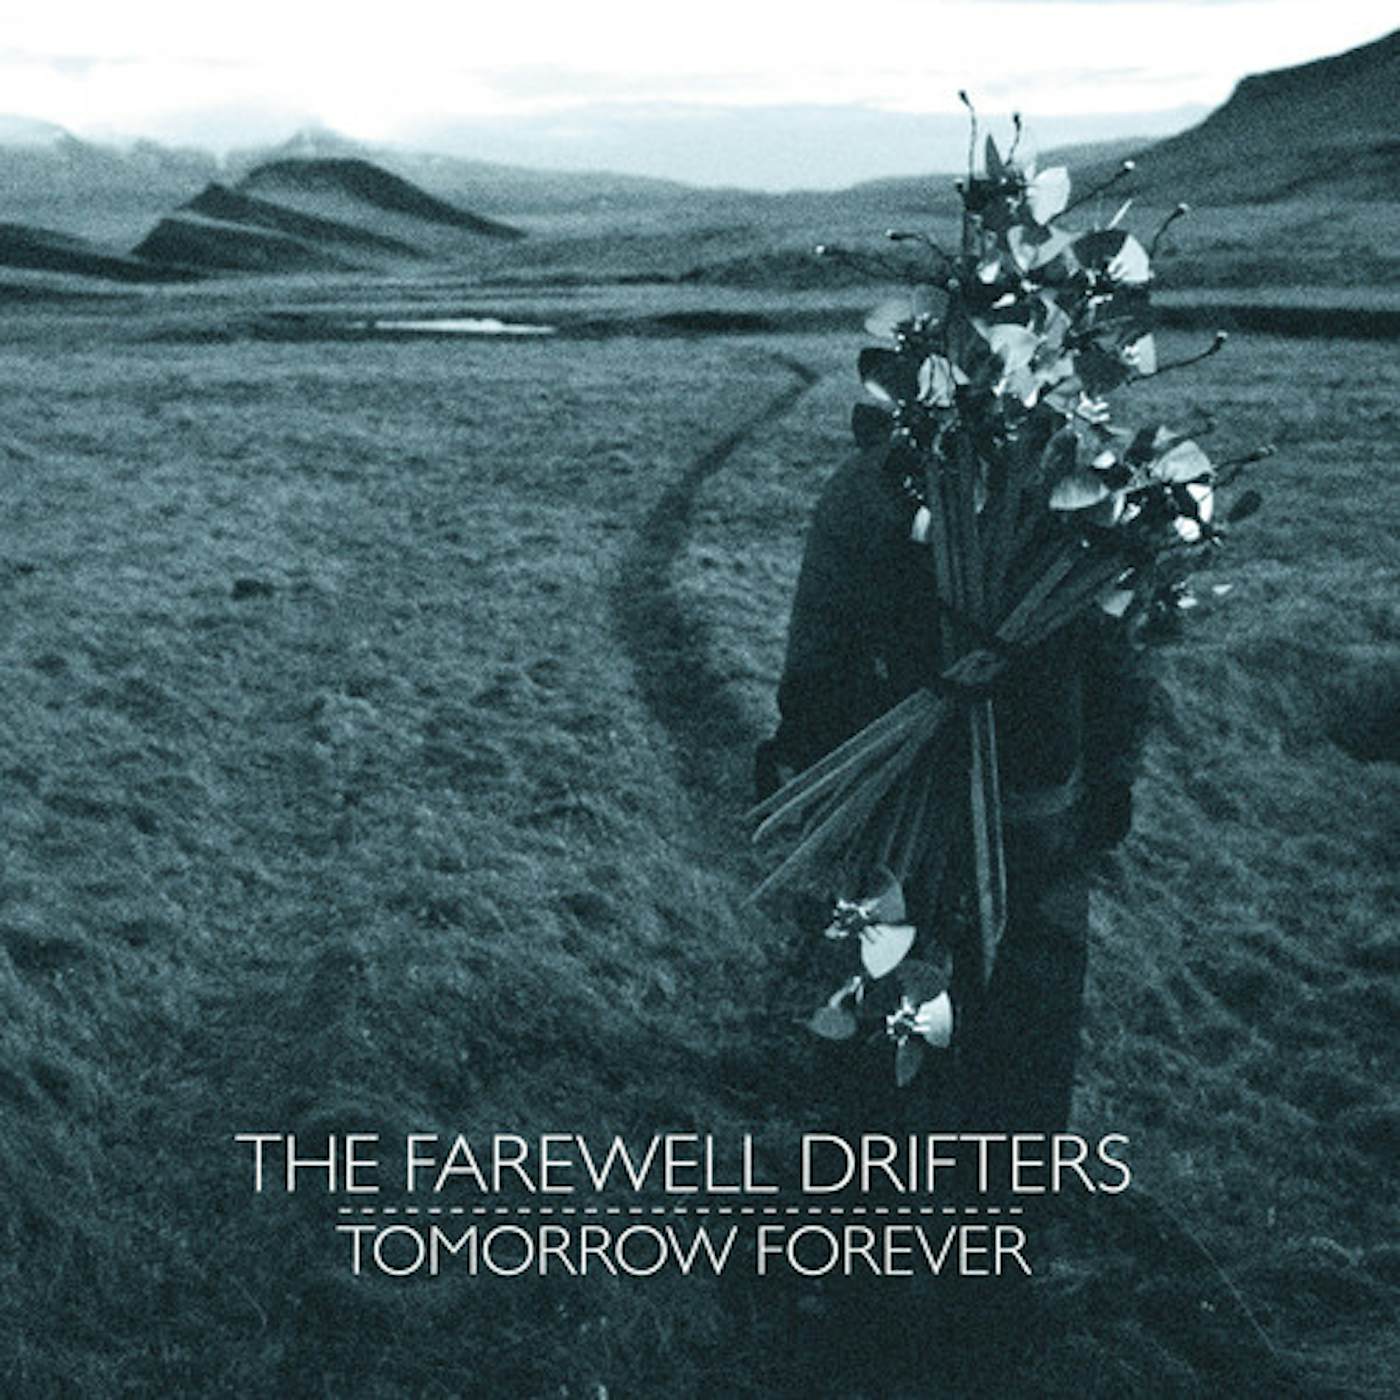 The Farewell Drifters Tomorrow Forever Vinyl Record